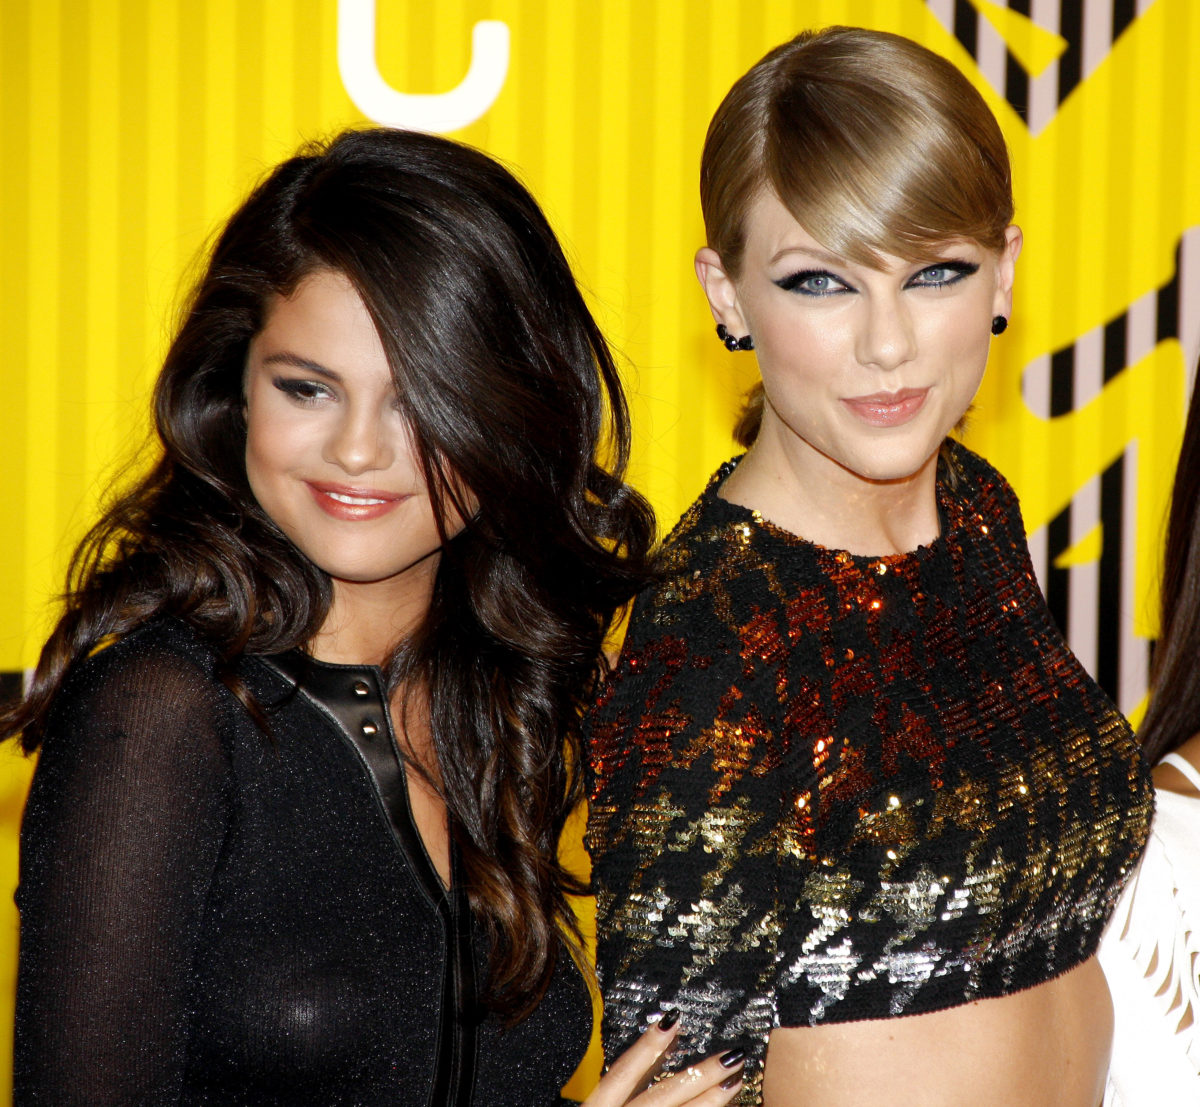 Selena Gomez Finally Reveals What She Taylor Swift In Gossip Session Seen Around the World | The best way to explain the Golden Globes Award ceremony on January 7 is chaotic. But that doesn’t mean it wasn’t full of moments that quickly went viral.